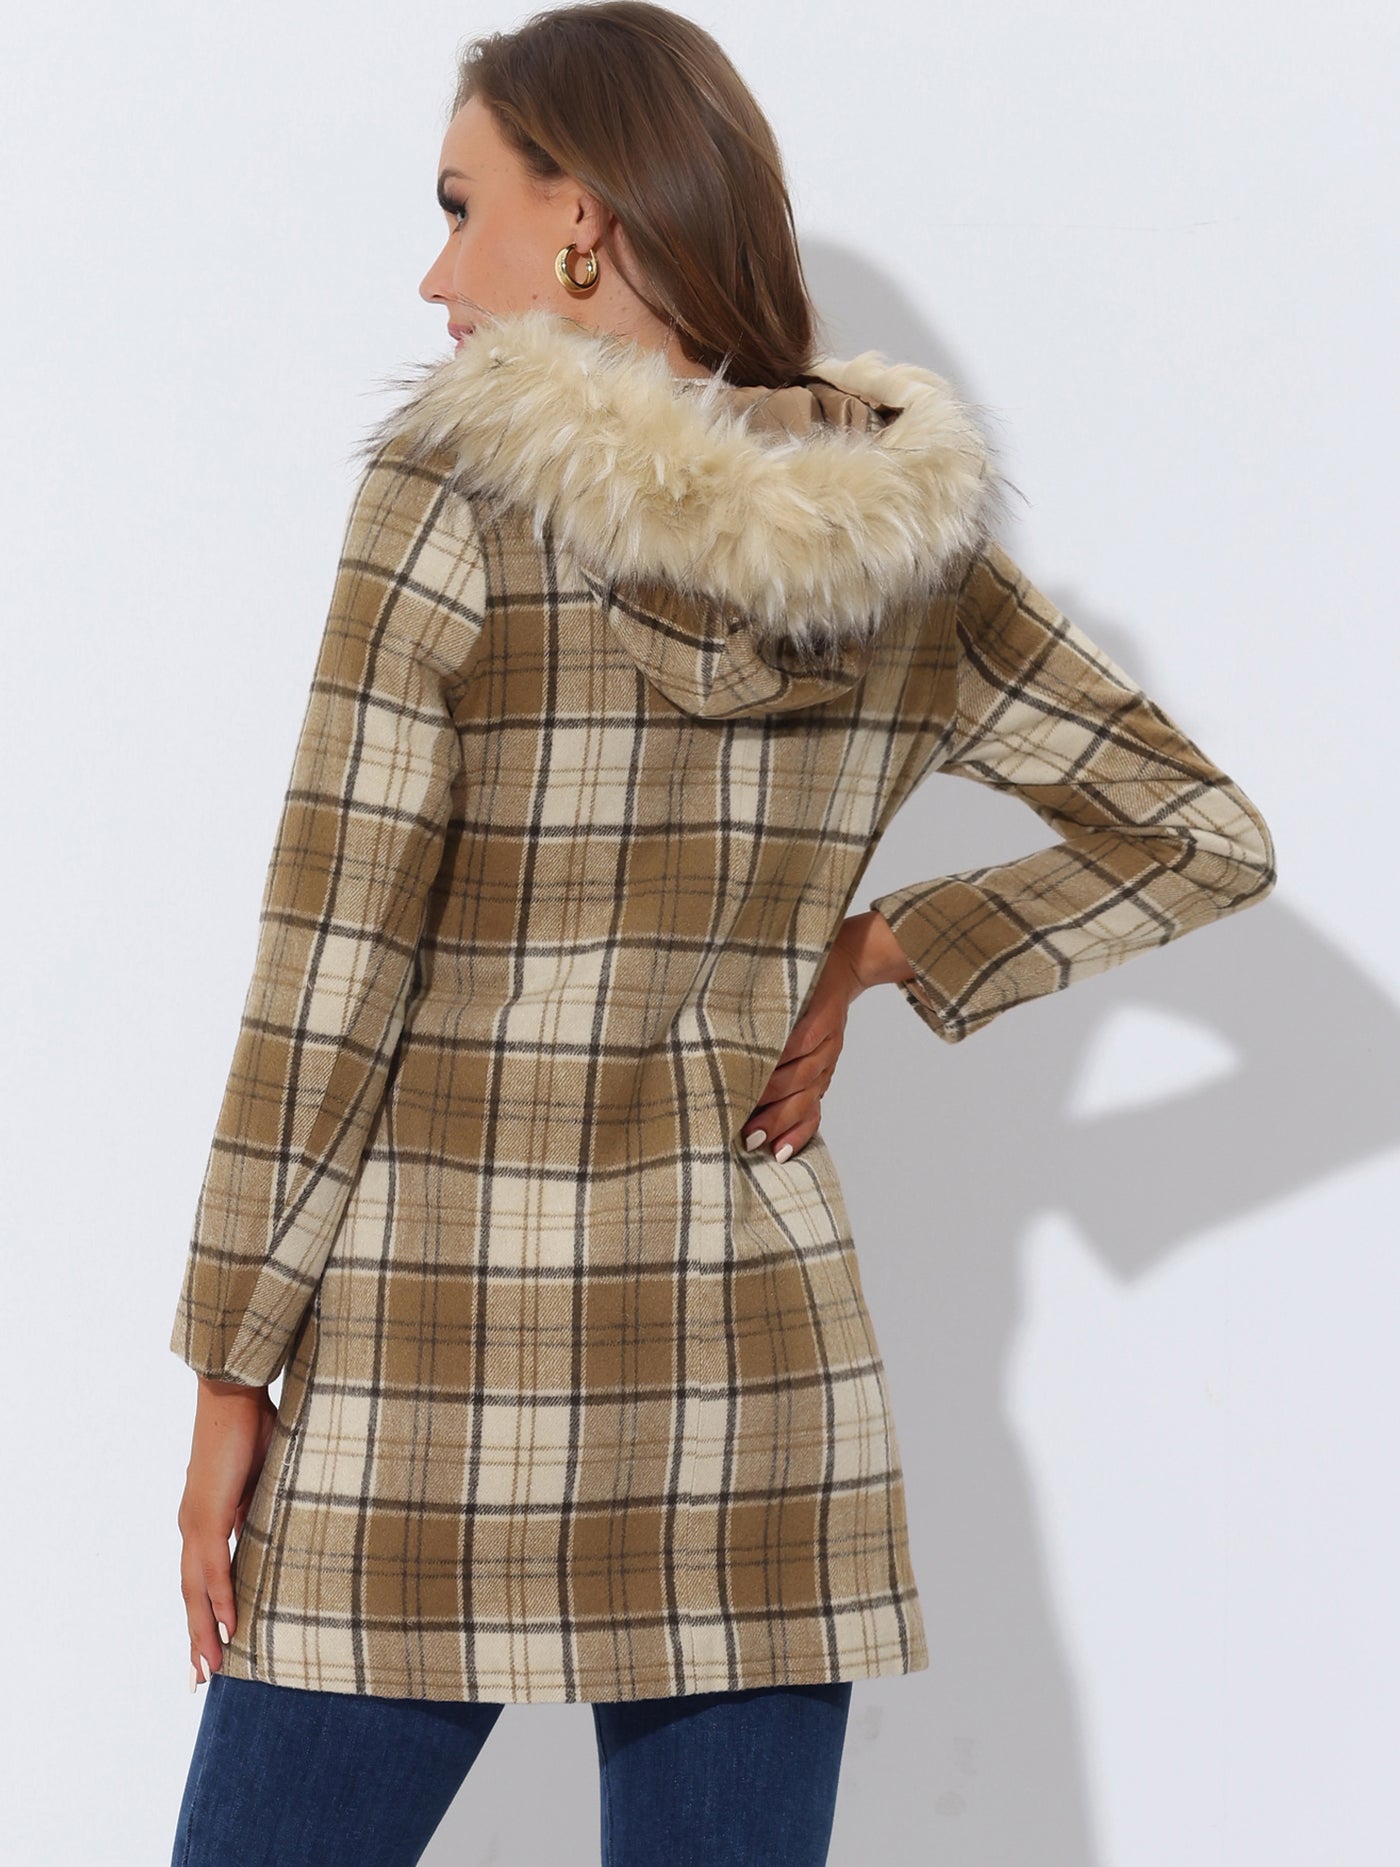 Allegra K Winter Thick Button Front Pockets Check Plaid Coat with Fluffy Hood